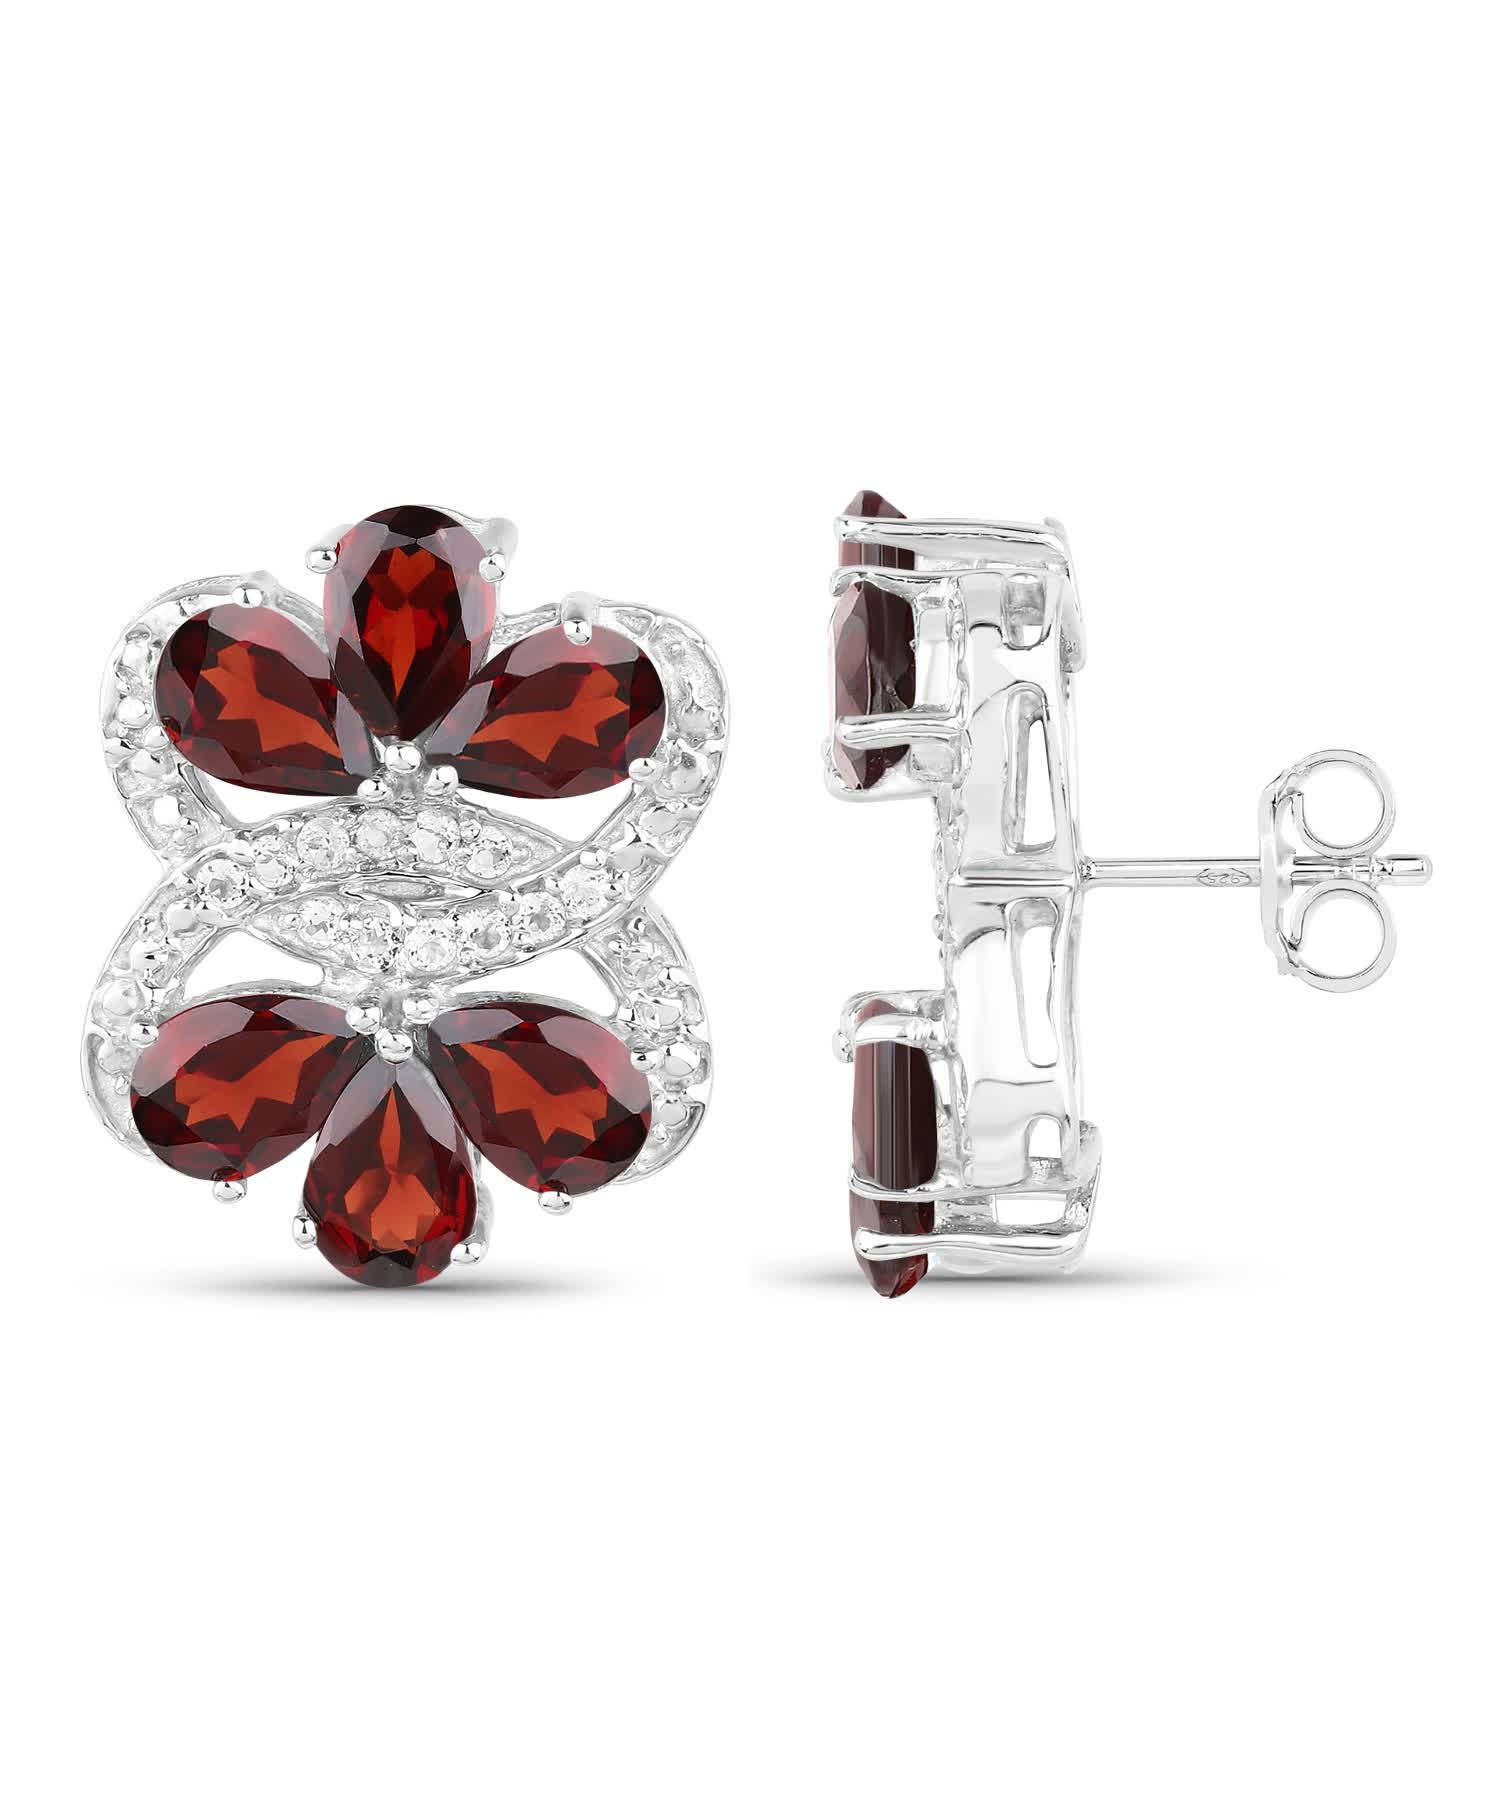 10.38ctw Natural Garnet and White Topaz Rhodium Plated 925 Sterling Silver Fashion Earrings View 2